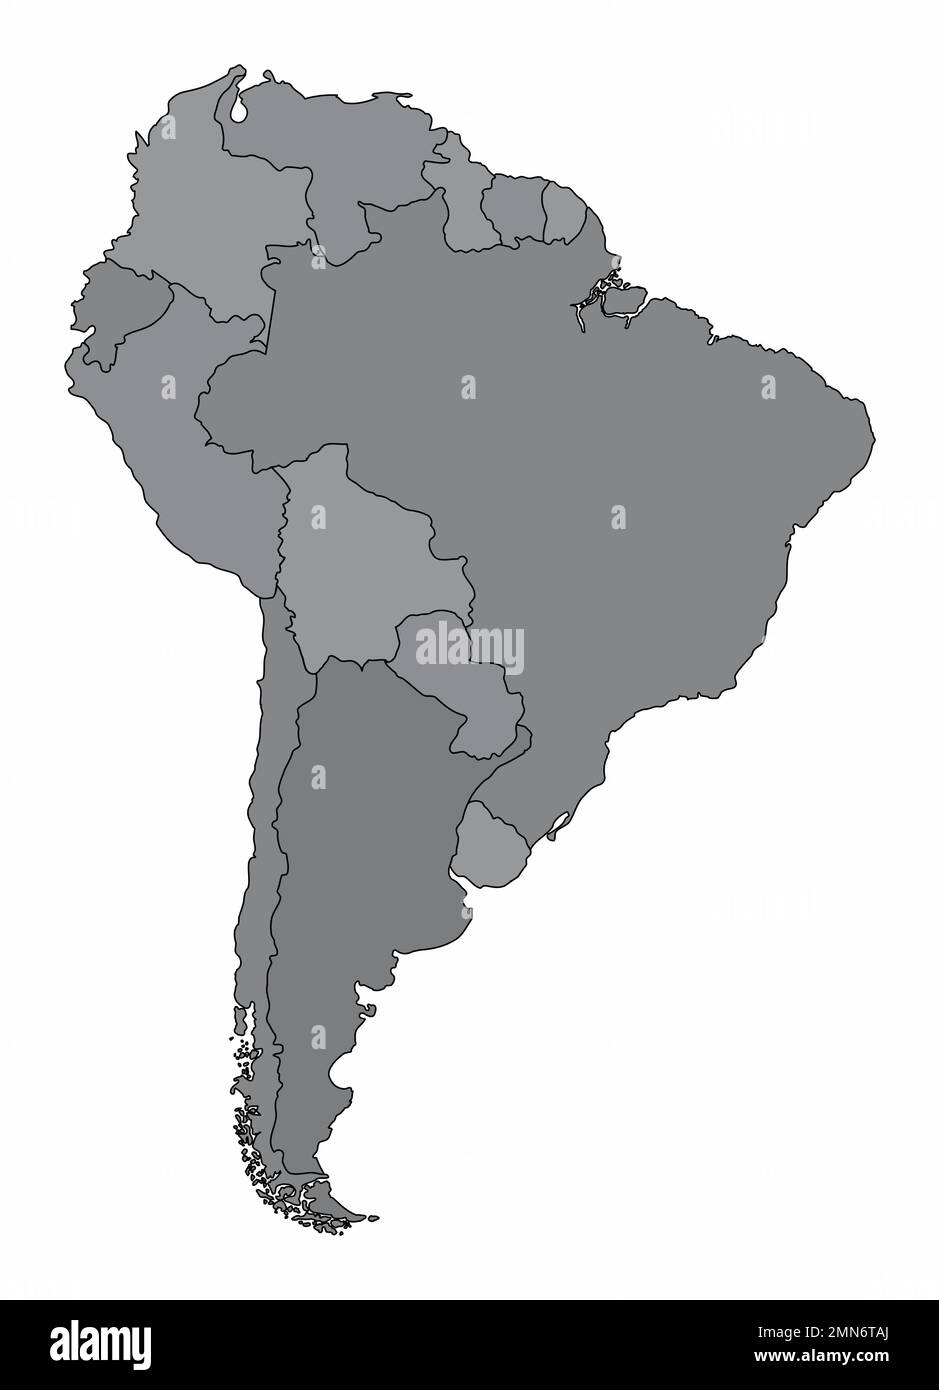 The South America political map divided in grayscale Stock Vector